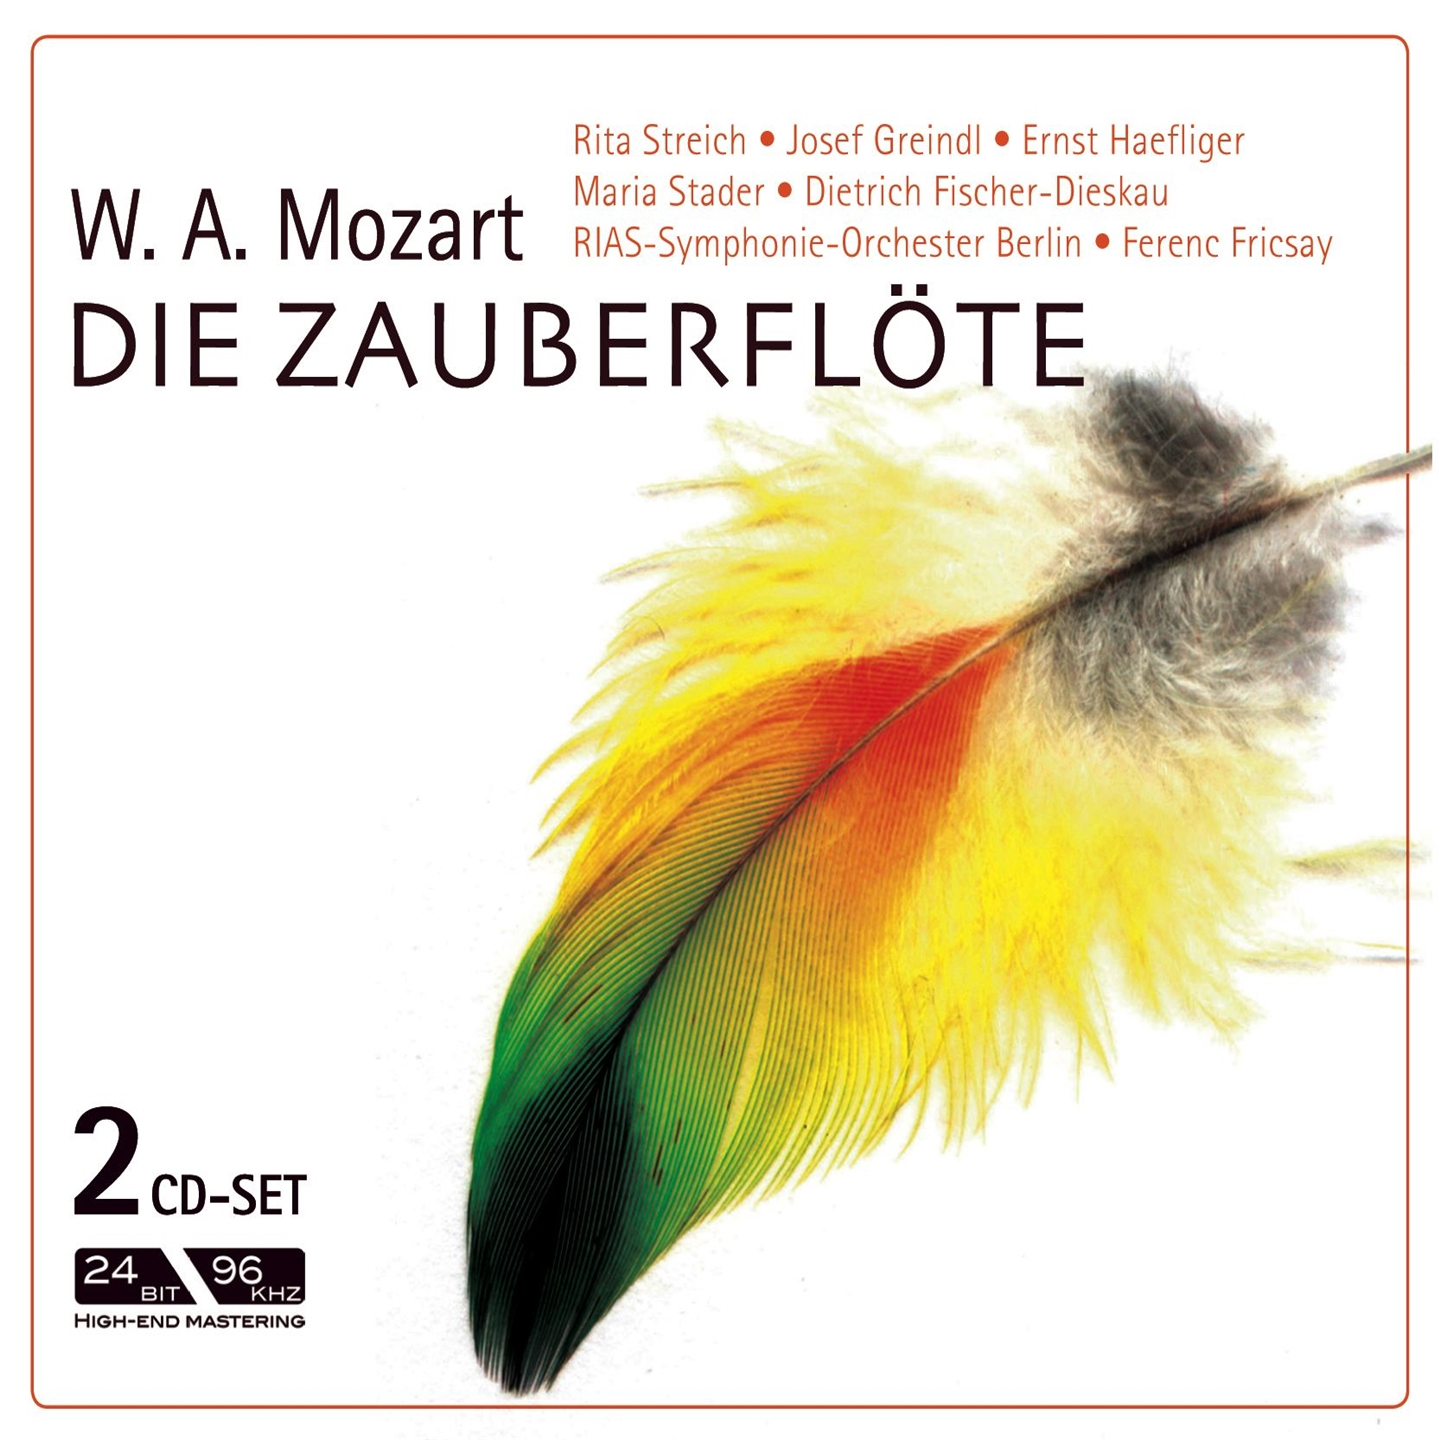 THE MAGIC FLUTE - A GERMAN OPERA IN TWO ACTS (RECORDED IN 1954)